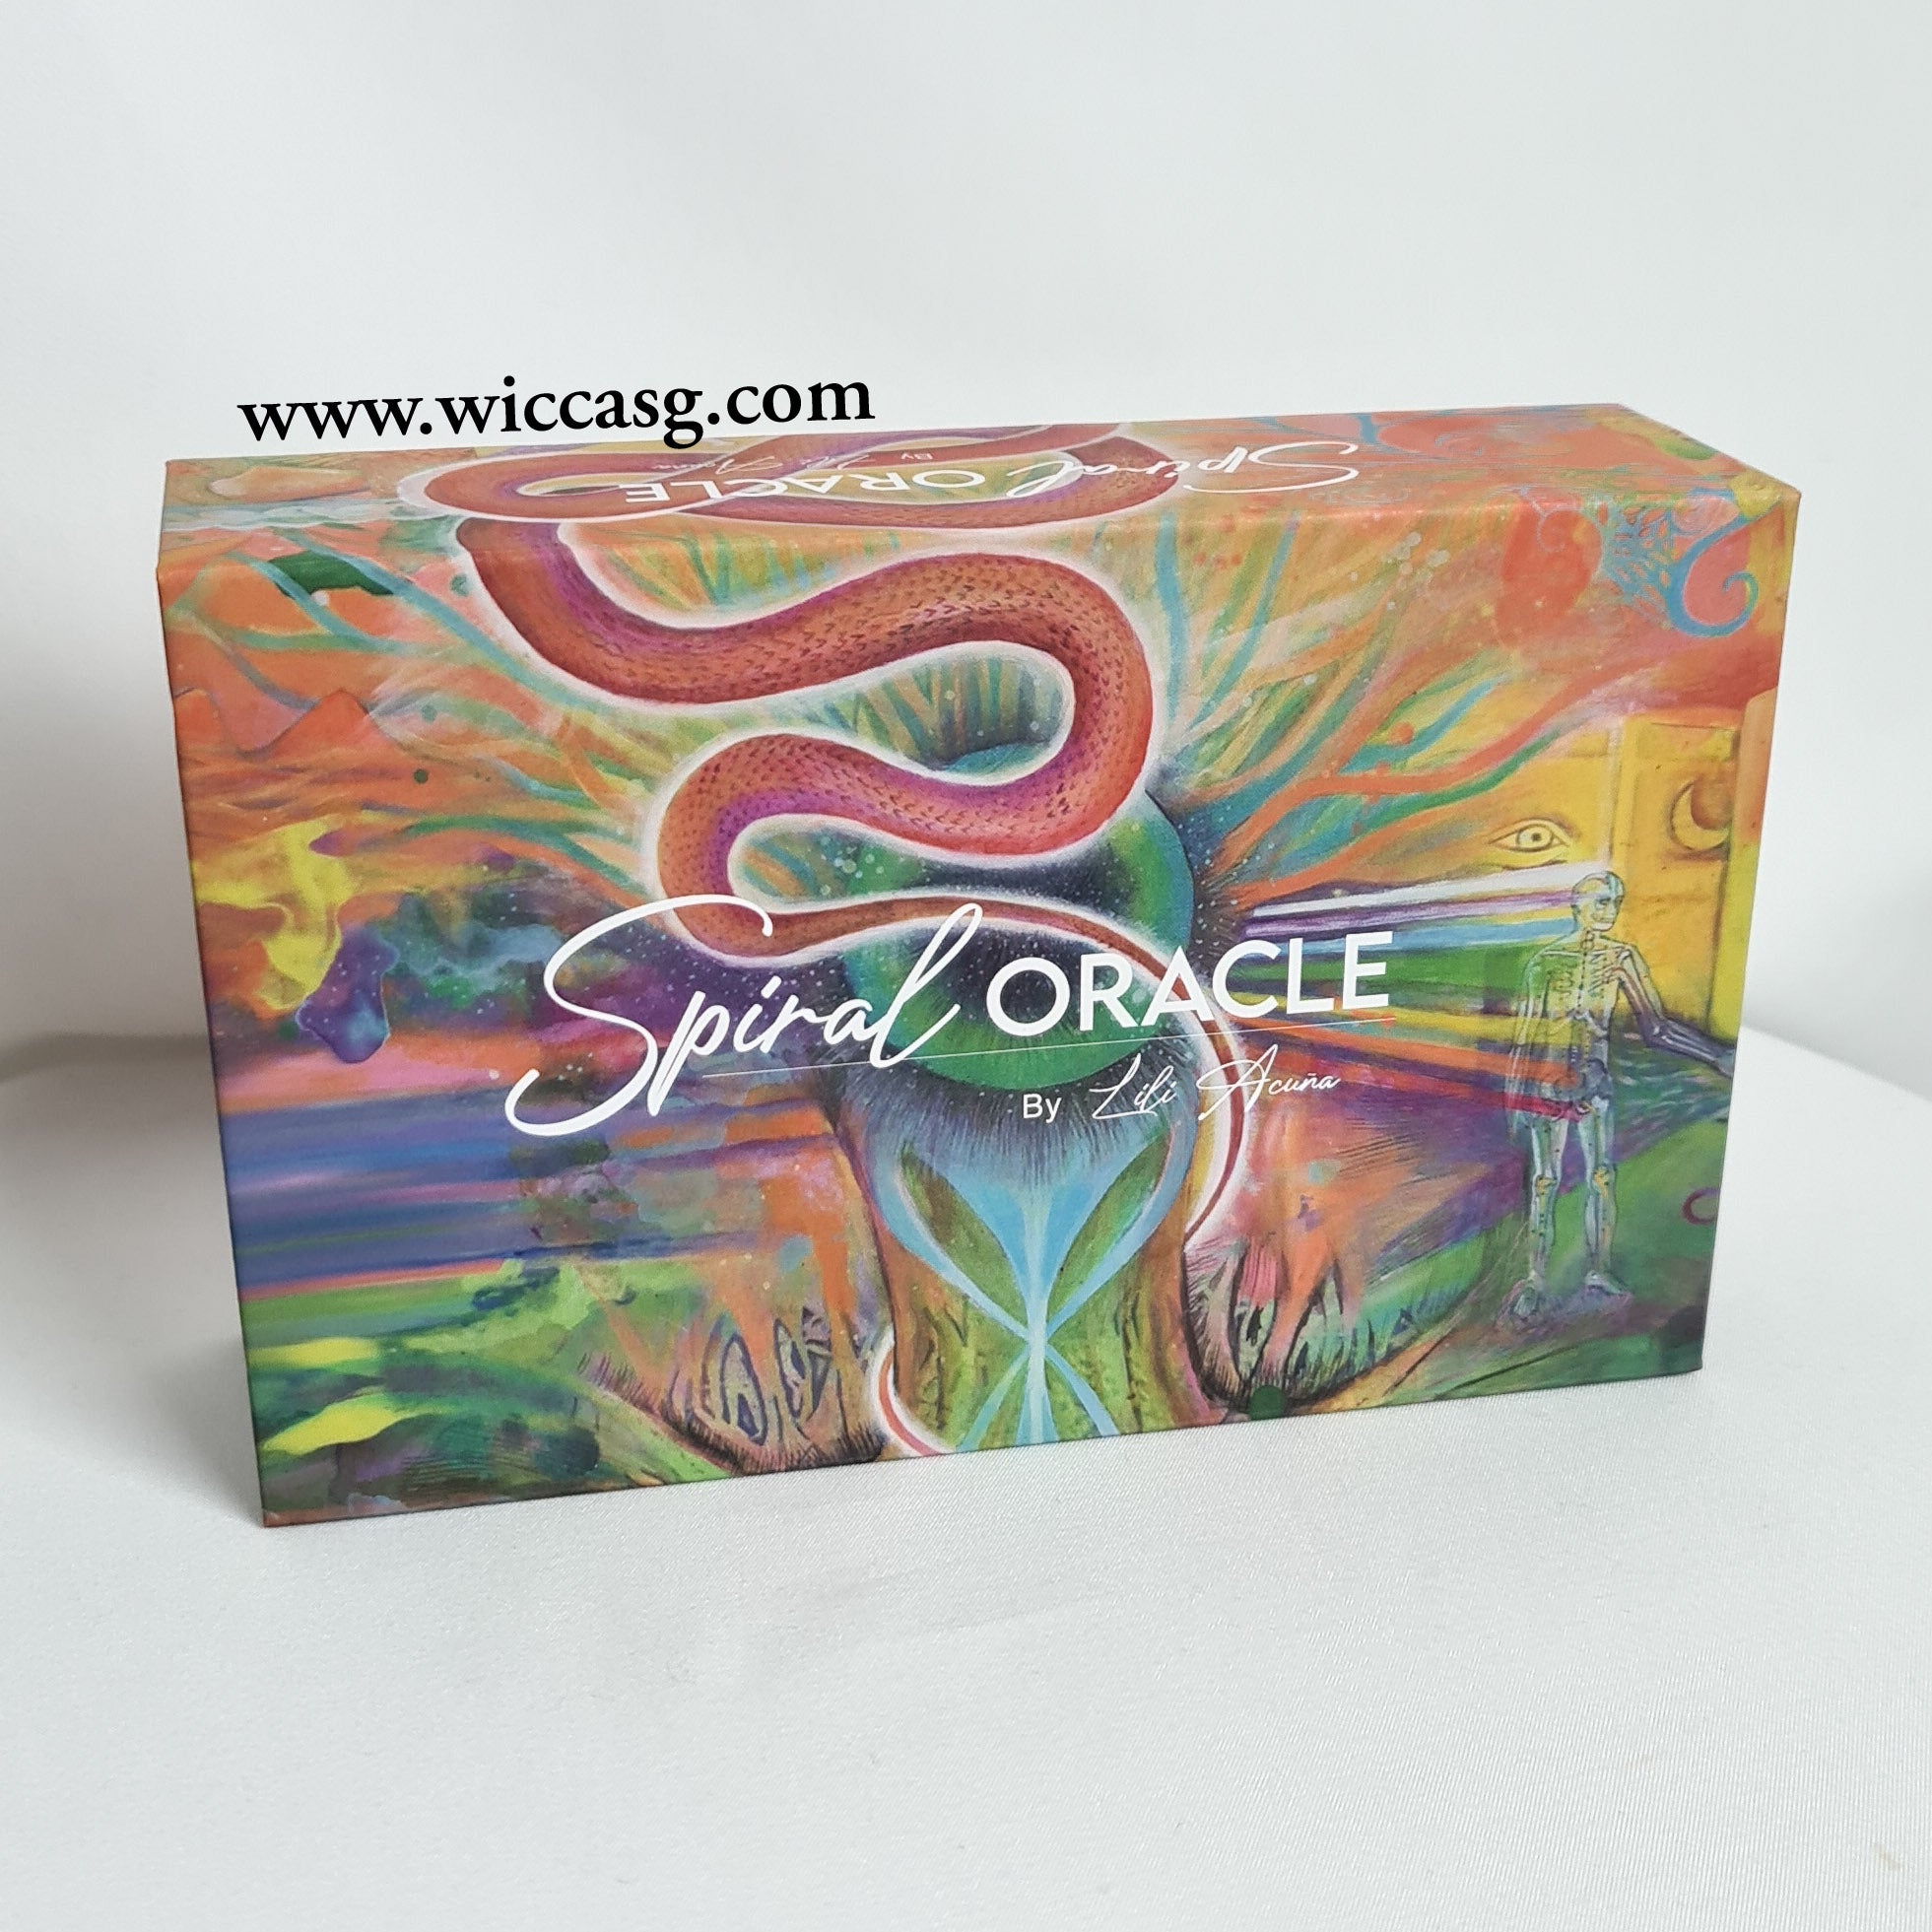 Spiral Oracle